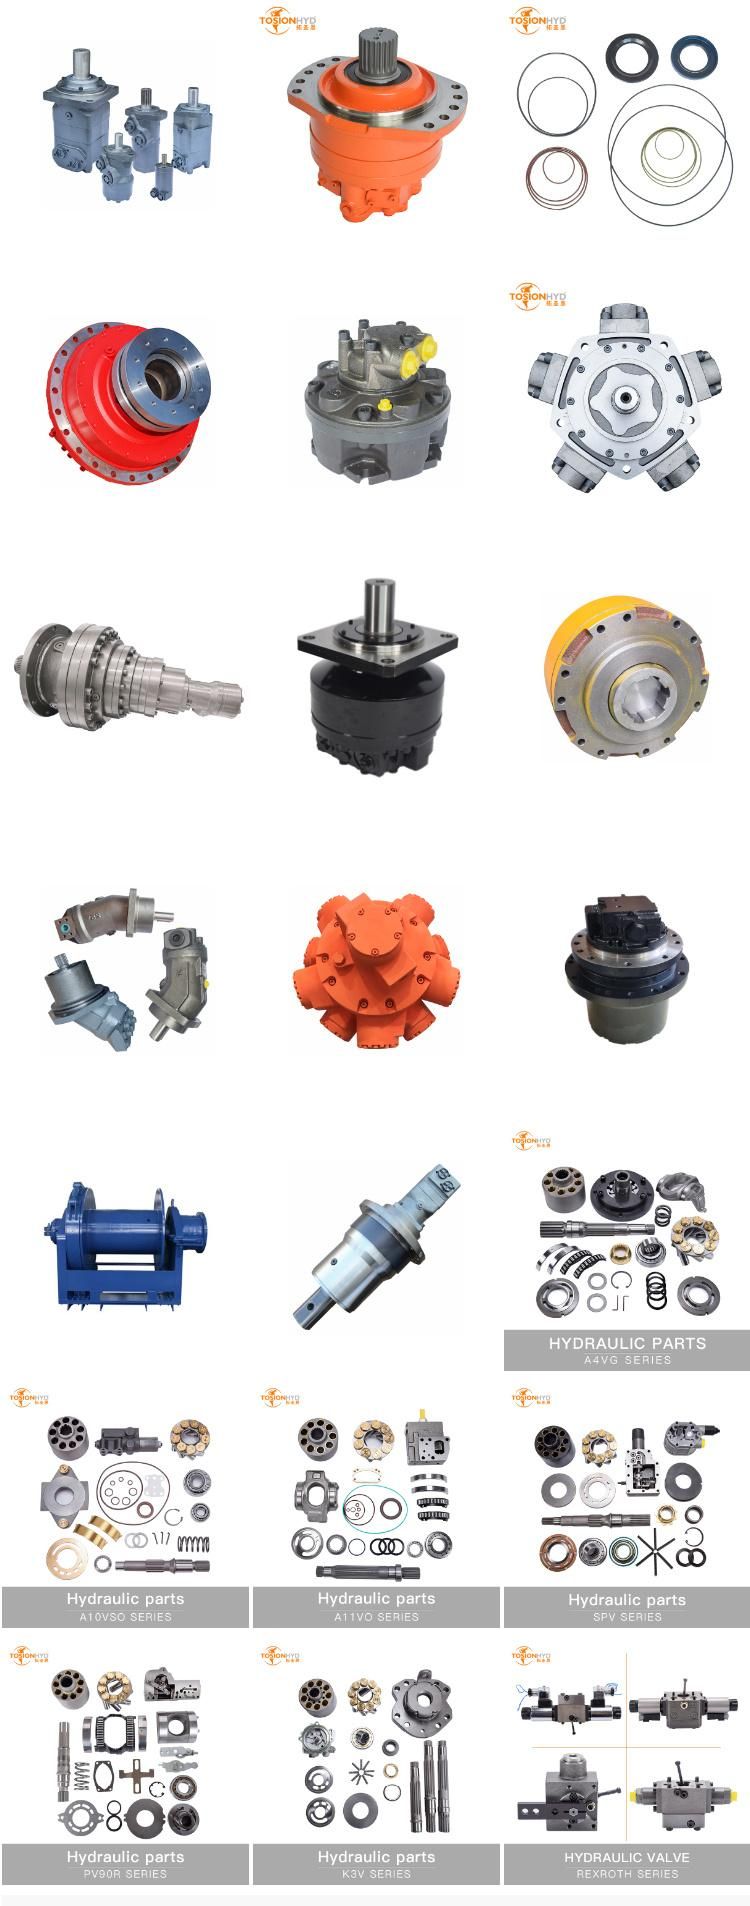 A2FM250 A2FM355 Hydraulic Motor Parts with Rexroth Spare Repair Kits